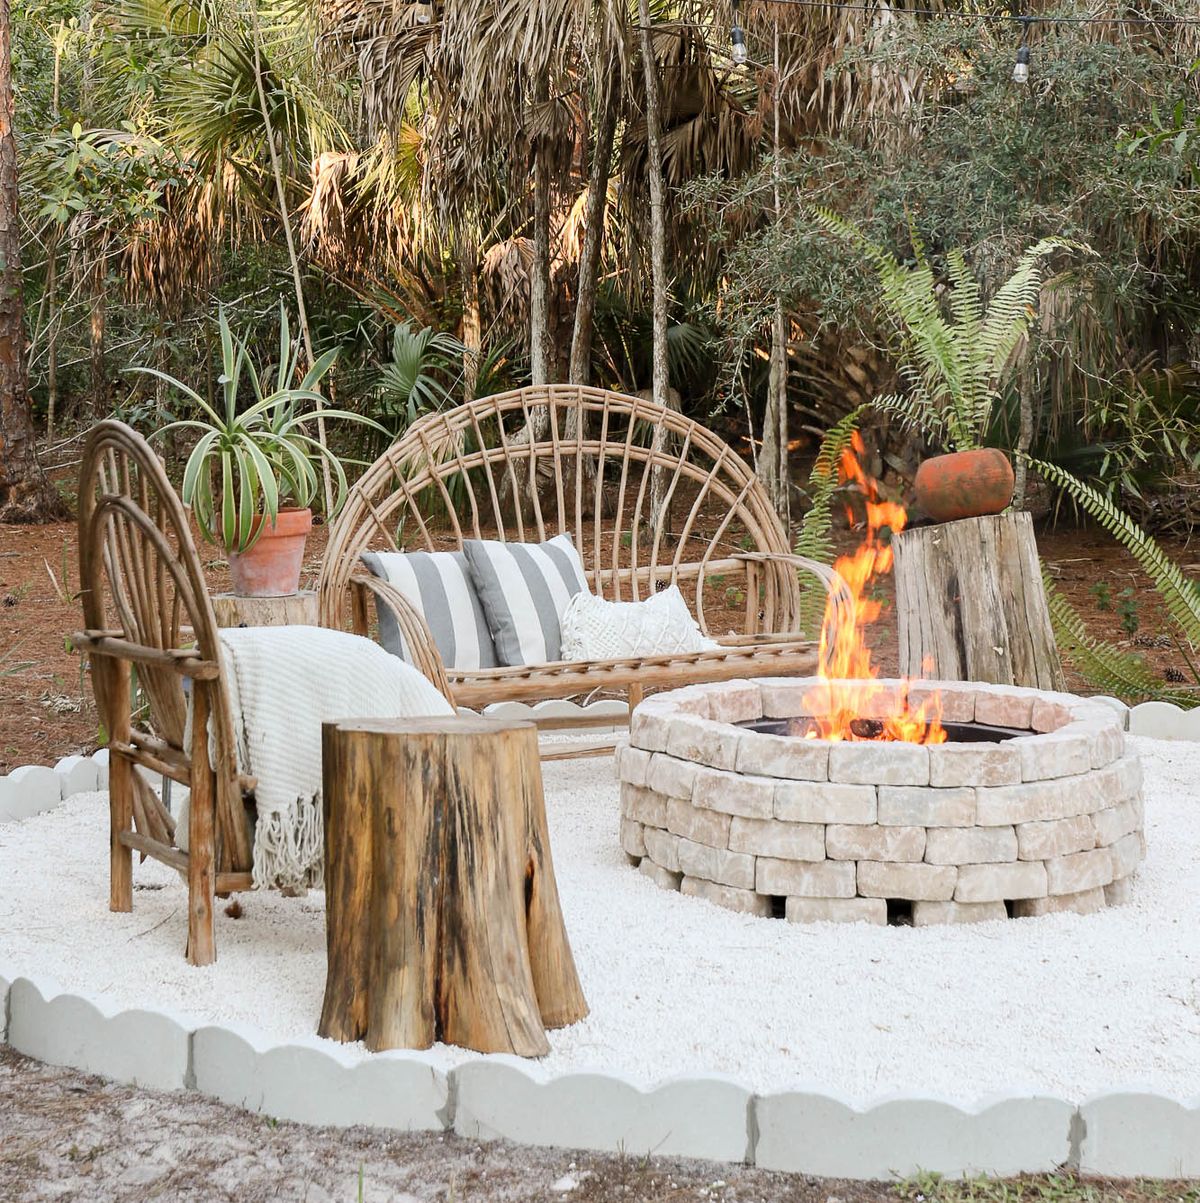 Outdoor fire pit in a garden with wicker furniture